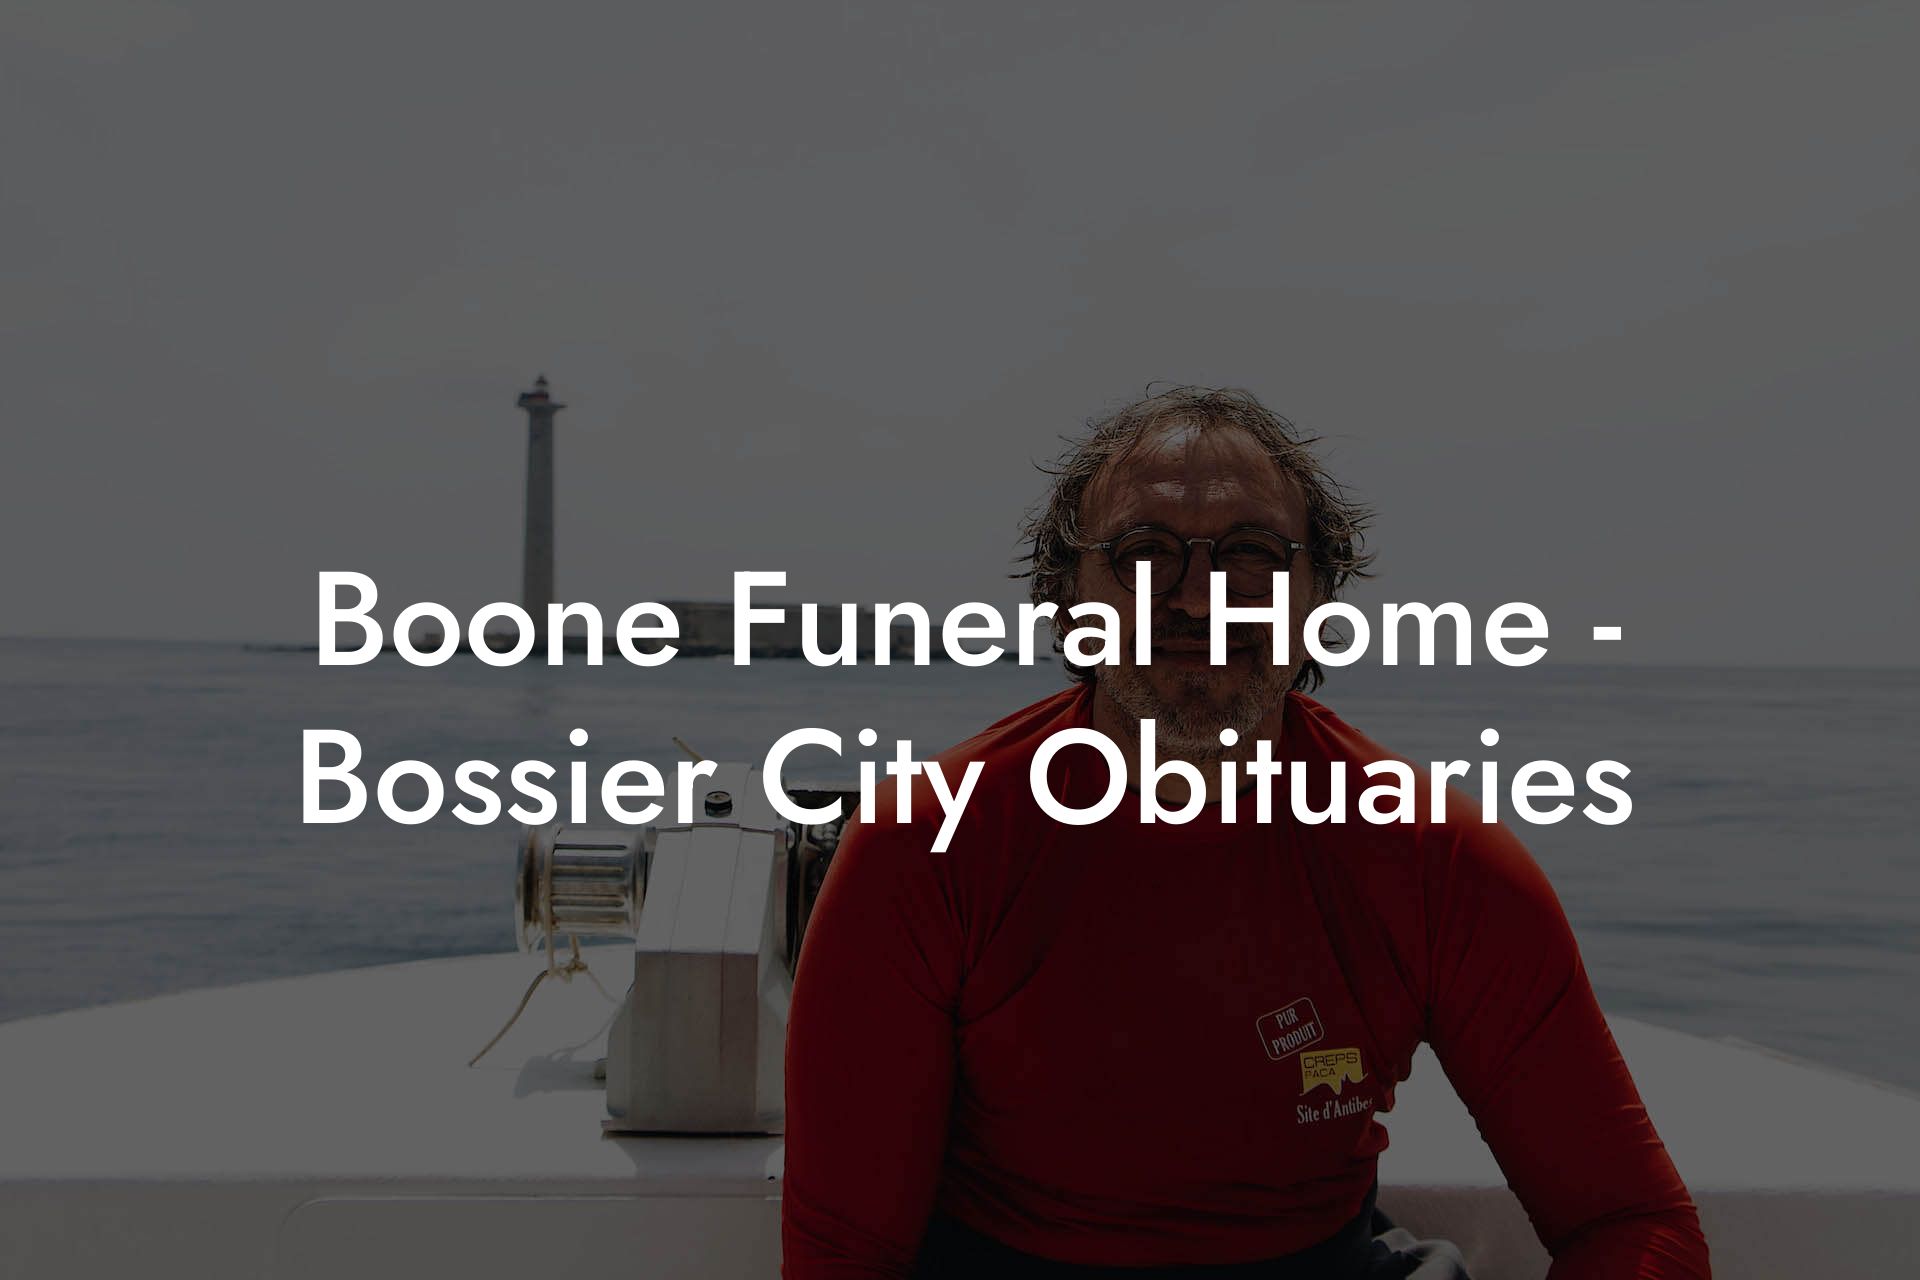 Boone Funeral Home - Bossier City Obituaries